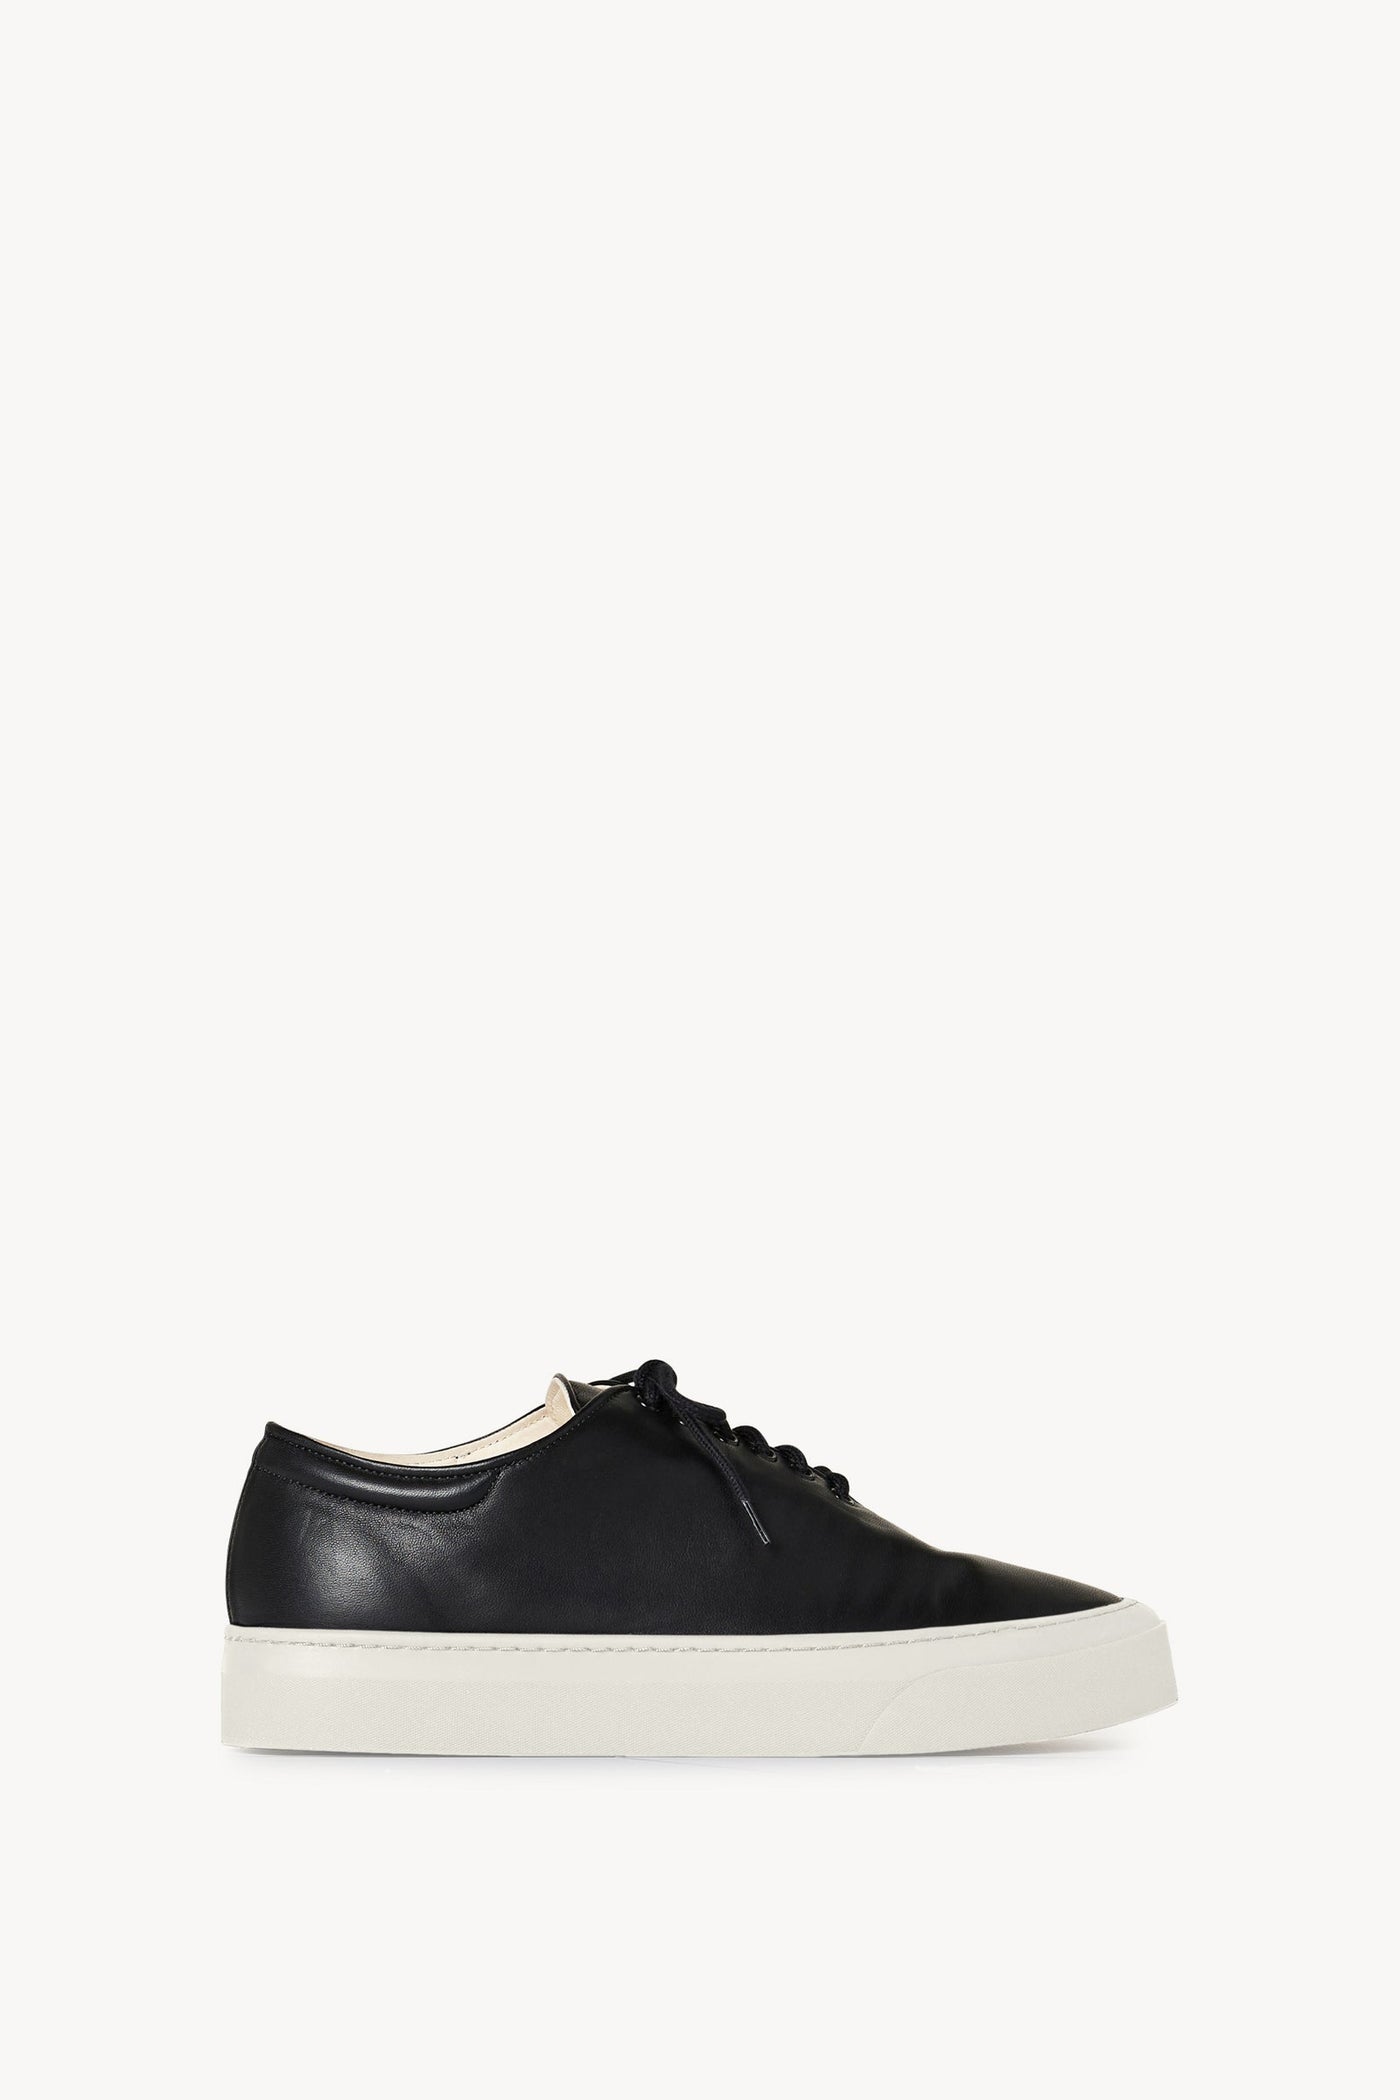 the-row-marie-h-lace-up-sneaker-black-amarees